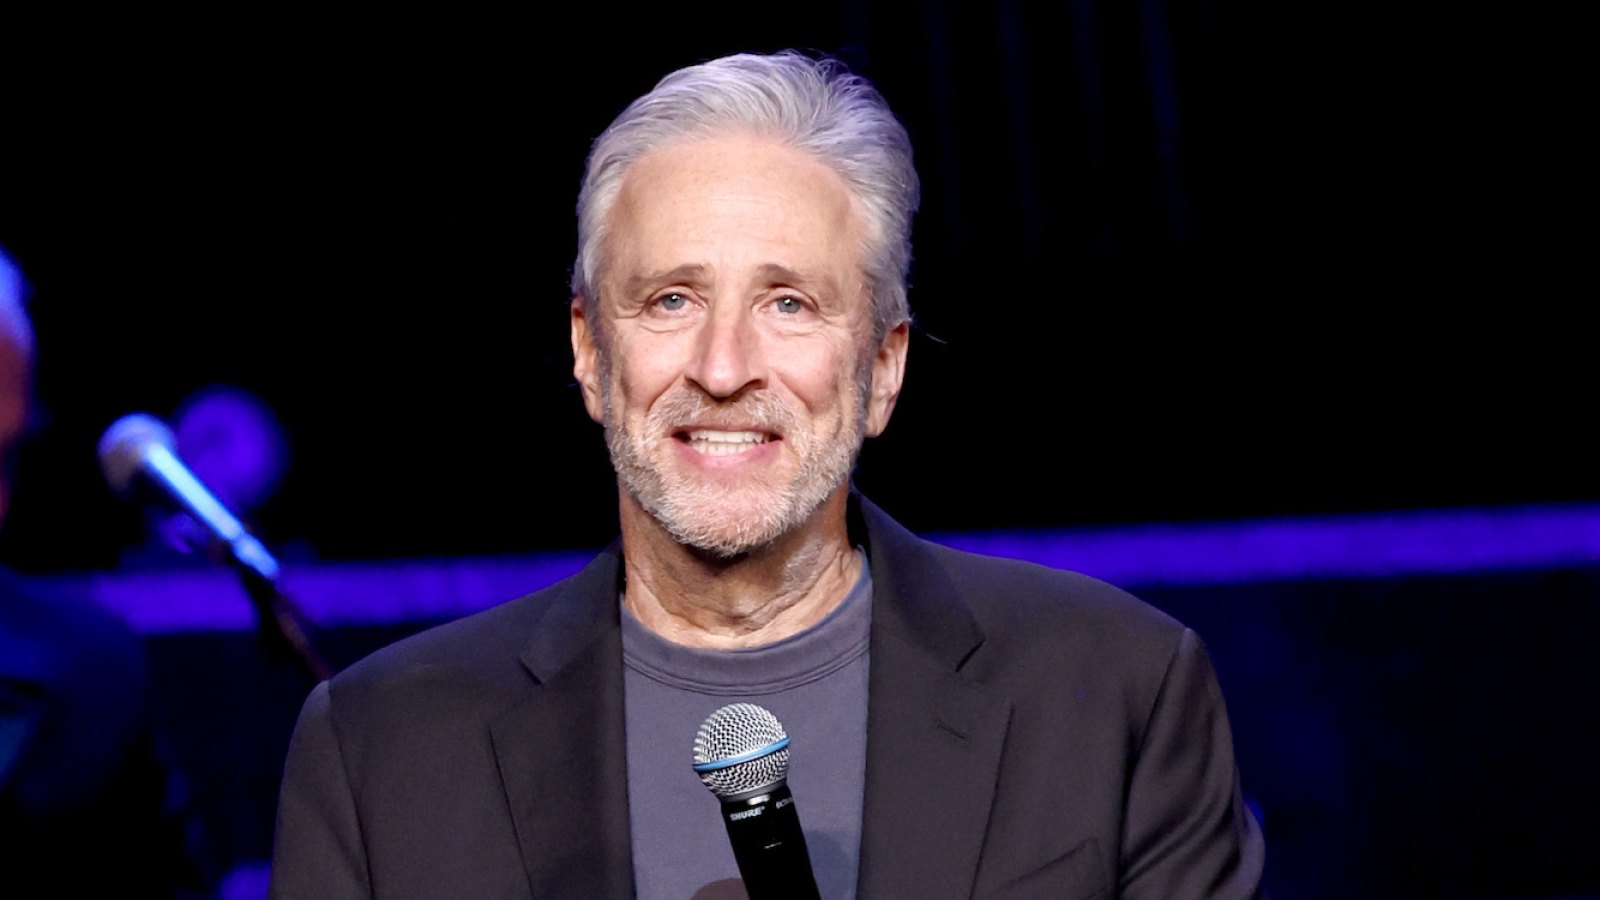 Jon Stewart Is Returning to Host The Daily Show